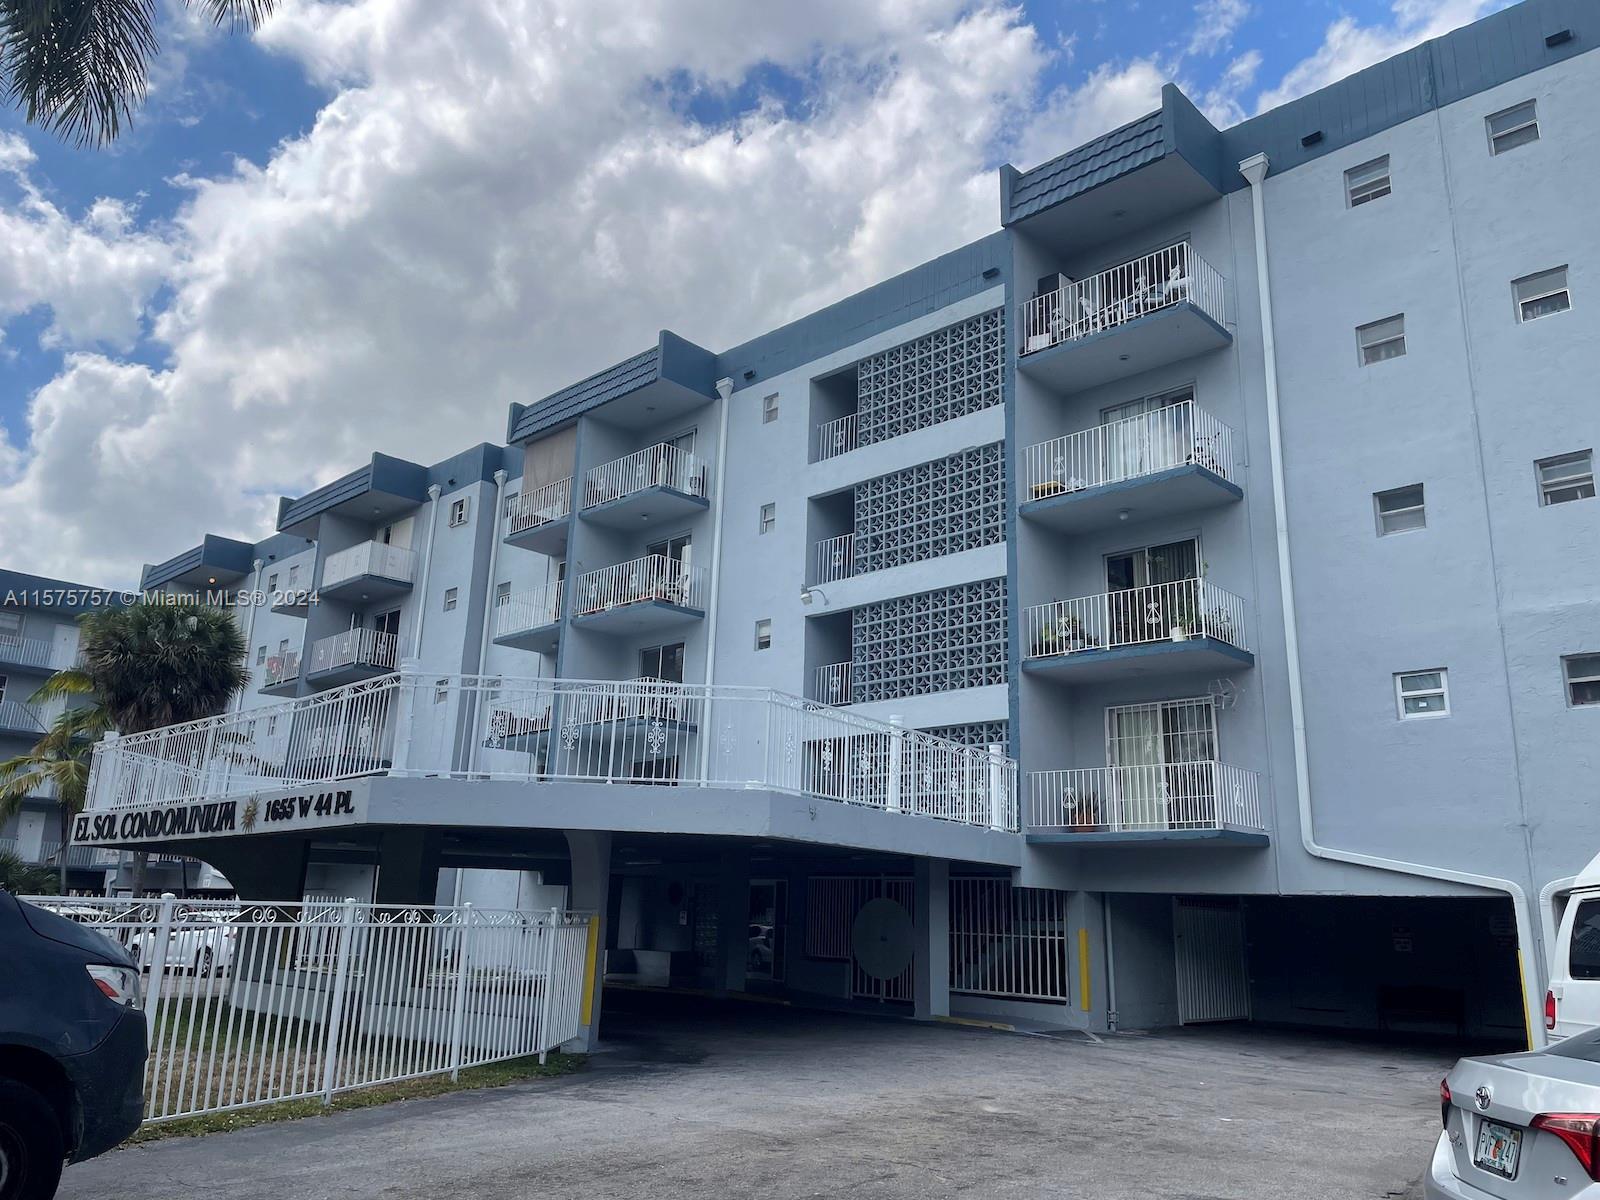 Beautiful 1/1 condominium in the heart of Hialeah. Spacious living/dining room, master bedroom with 